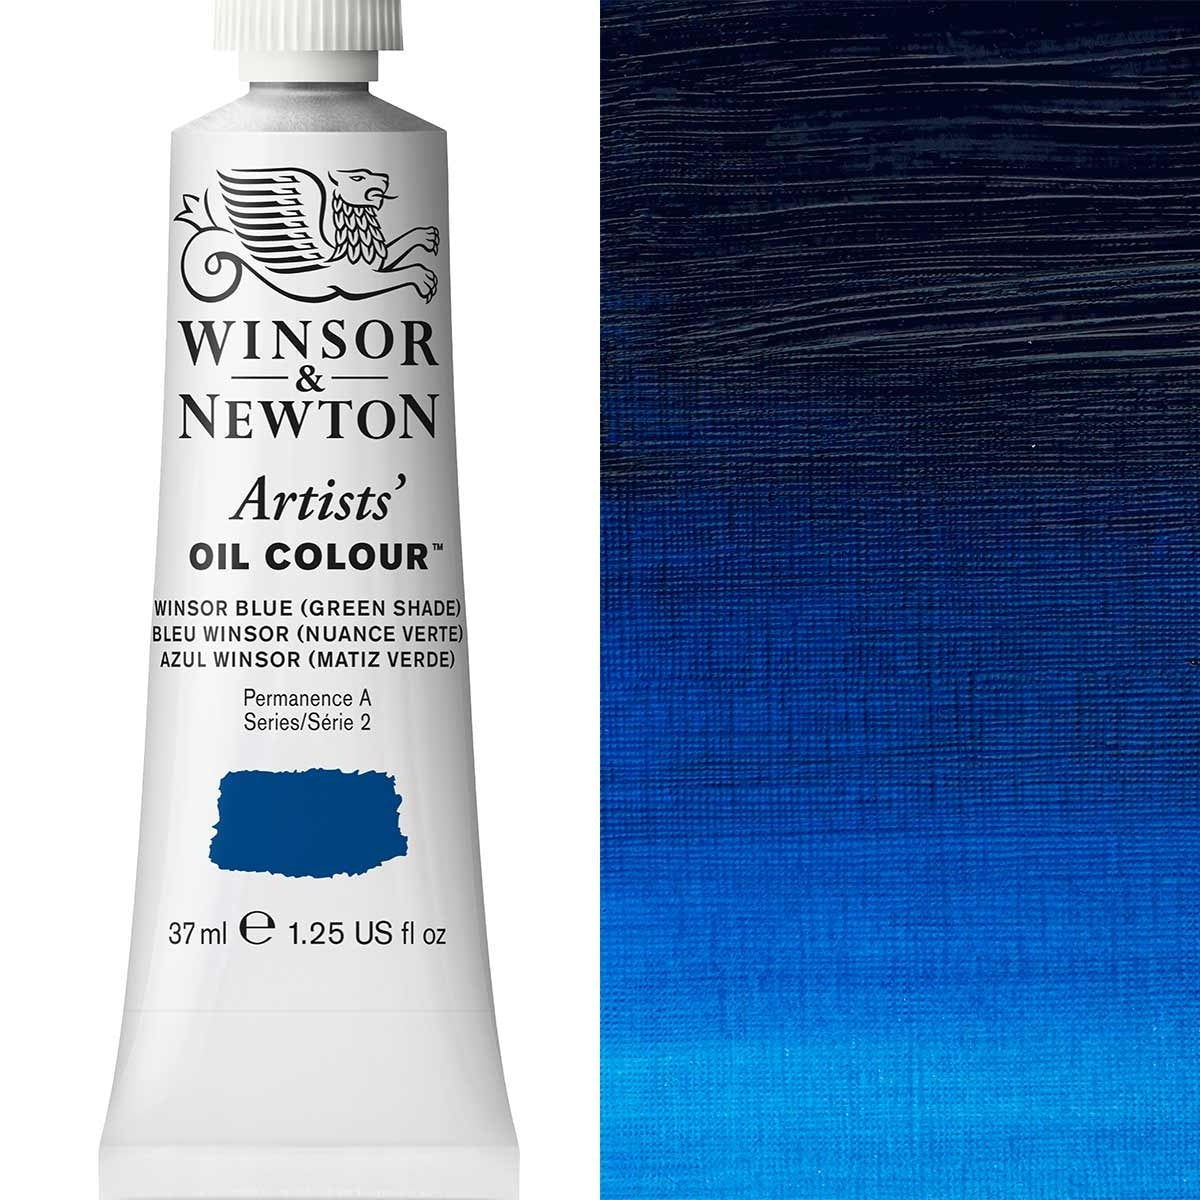 Winsor and Newton - Artists' Oil Colour - 37ml - Winsor Blue Green Shade